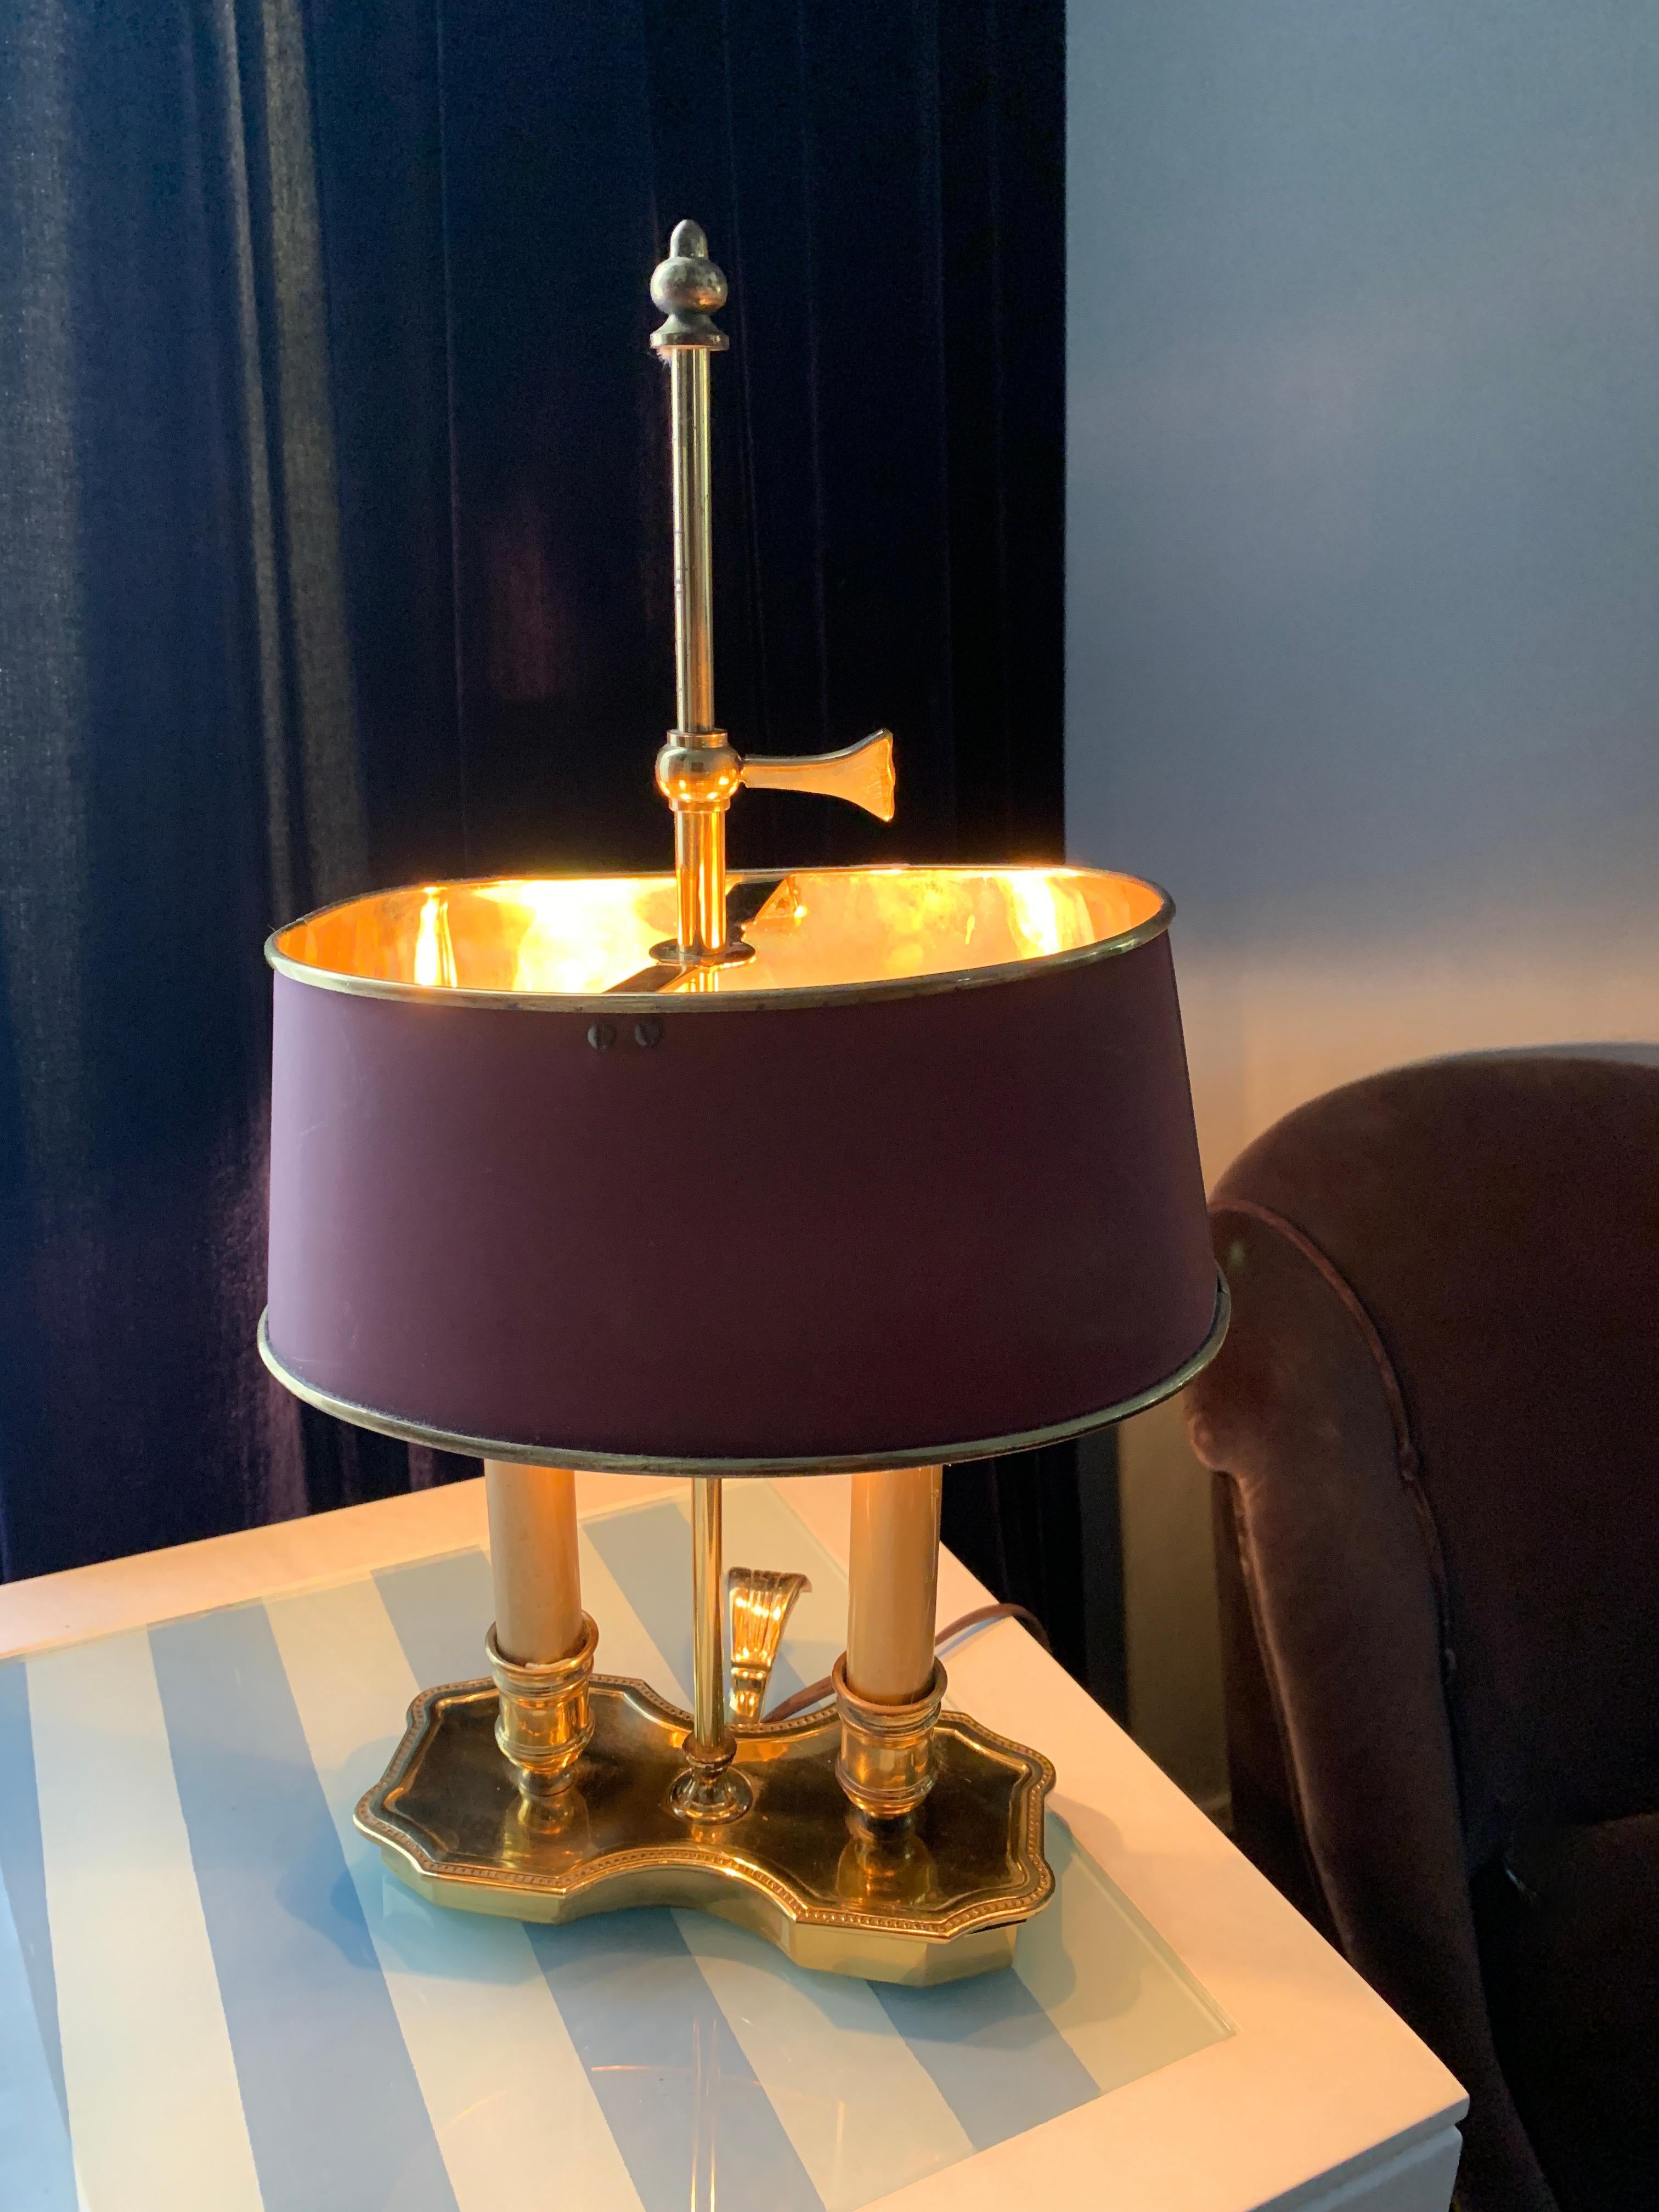 Double candle Bouillotte lamp with oval tole shade. Perfect for a desk or any area where good light is needed without having a large lamp. The shade is metal with a polished brass inside for beautiful reflection, and the base has a wonderful thumb